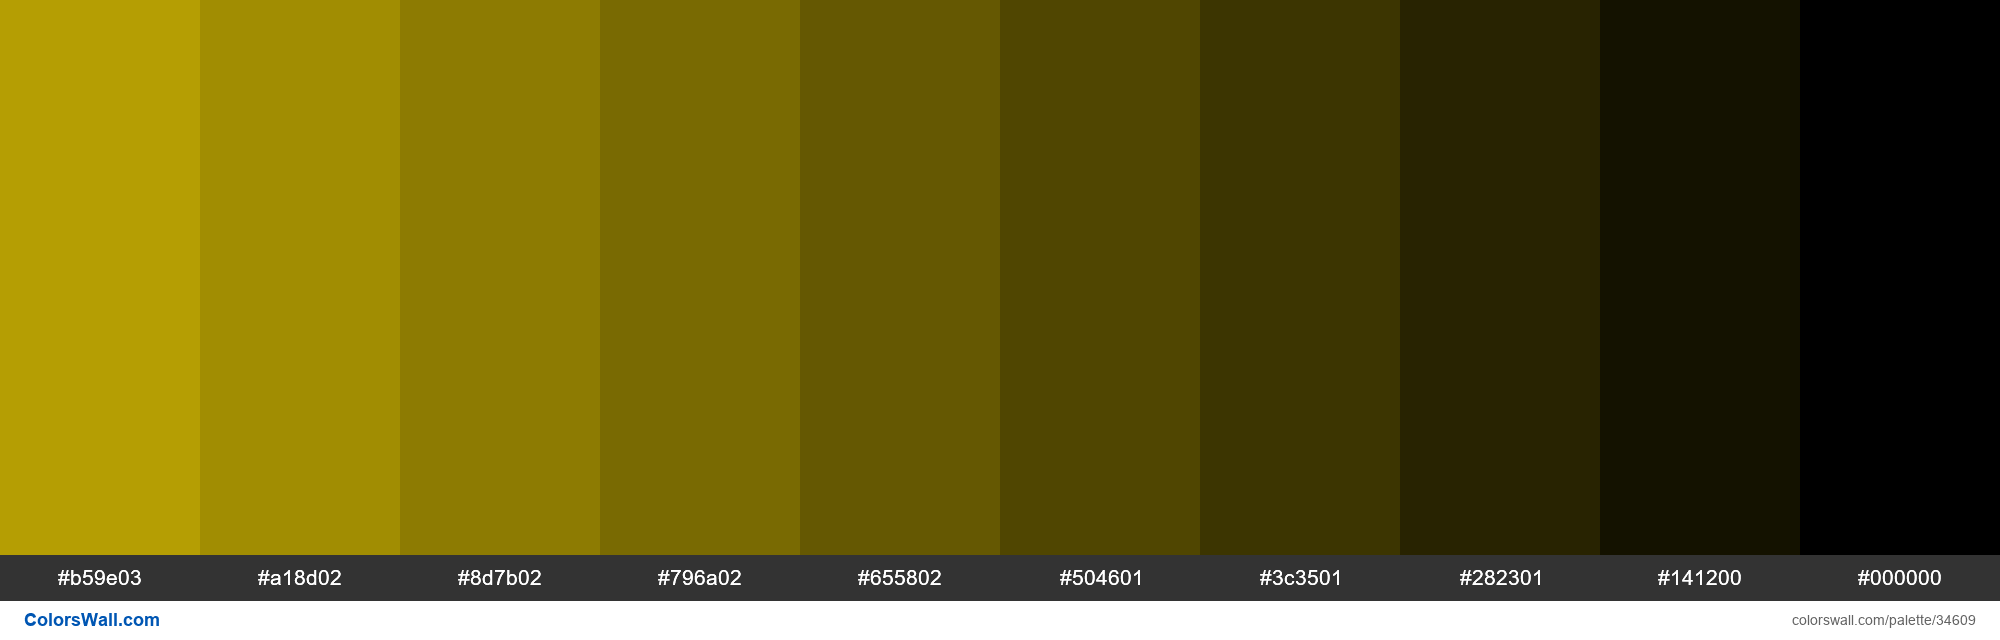 Shades XKCD Color brownish yellow #c9b003 hex colors palette ColorsWall